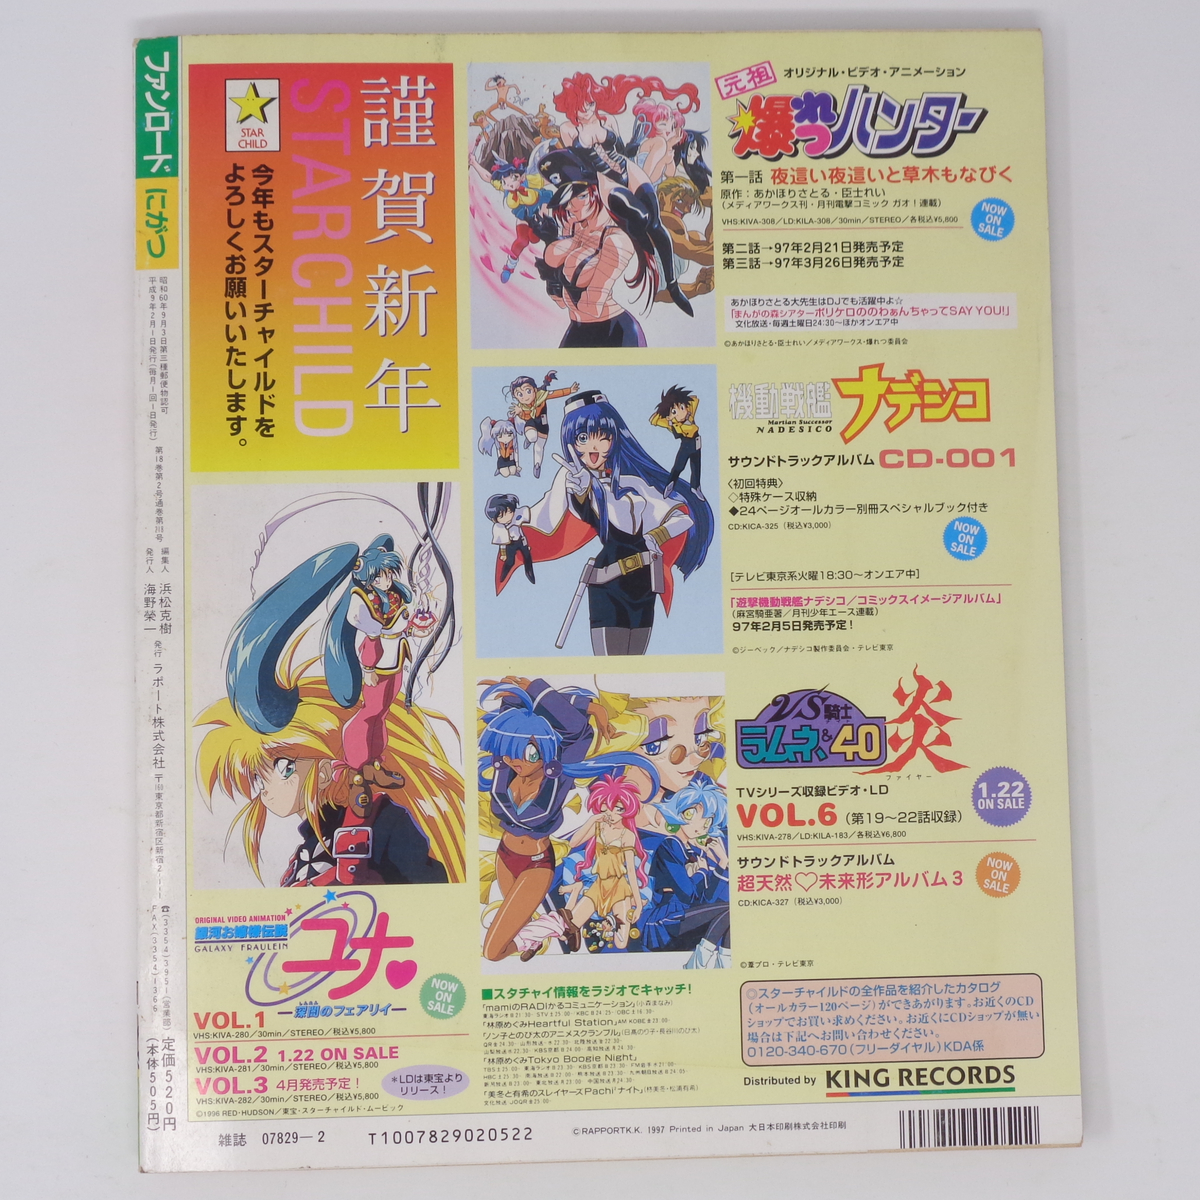 Fanload Fanroad 1997 year 2 month number pin nap calendar less / sing want special collection / super person Raideen / Shibata . beautiful / anime magazine [Free Shipping]